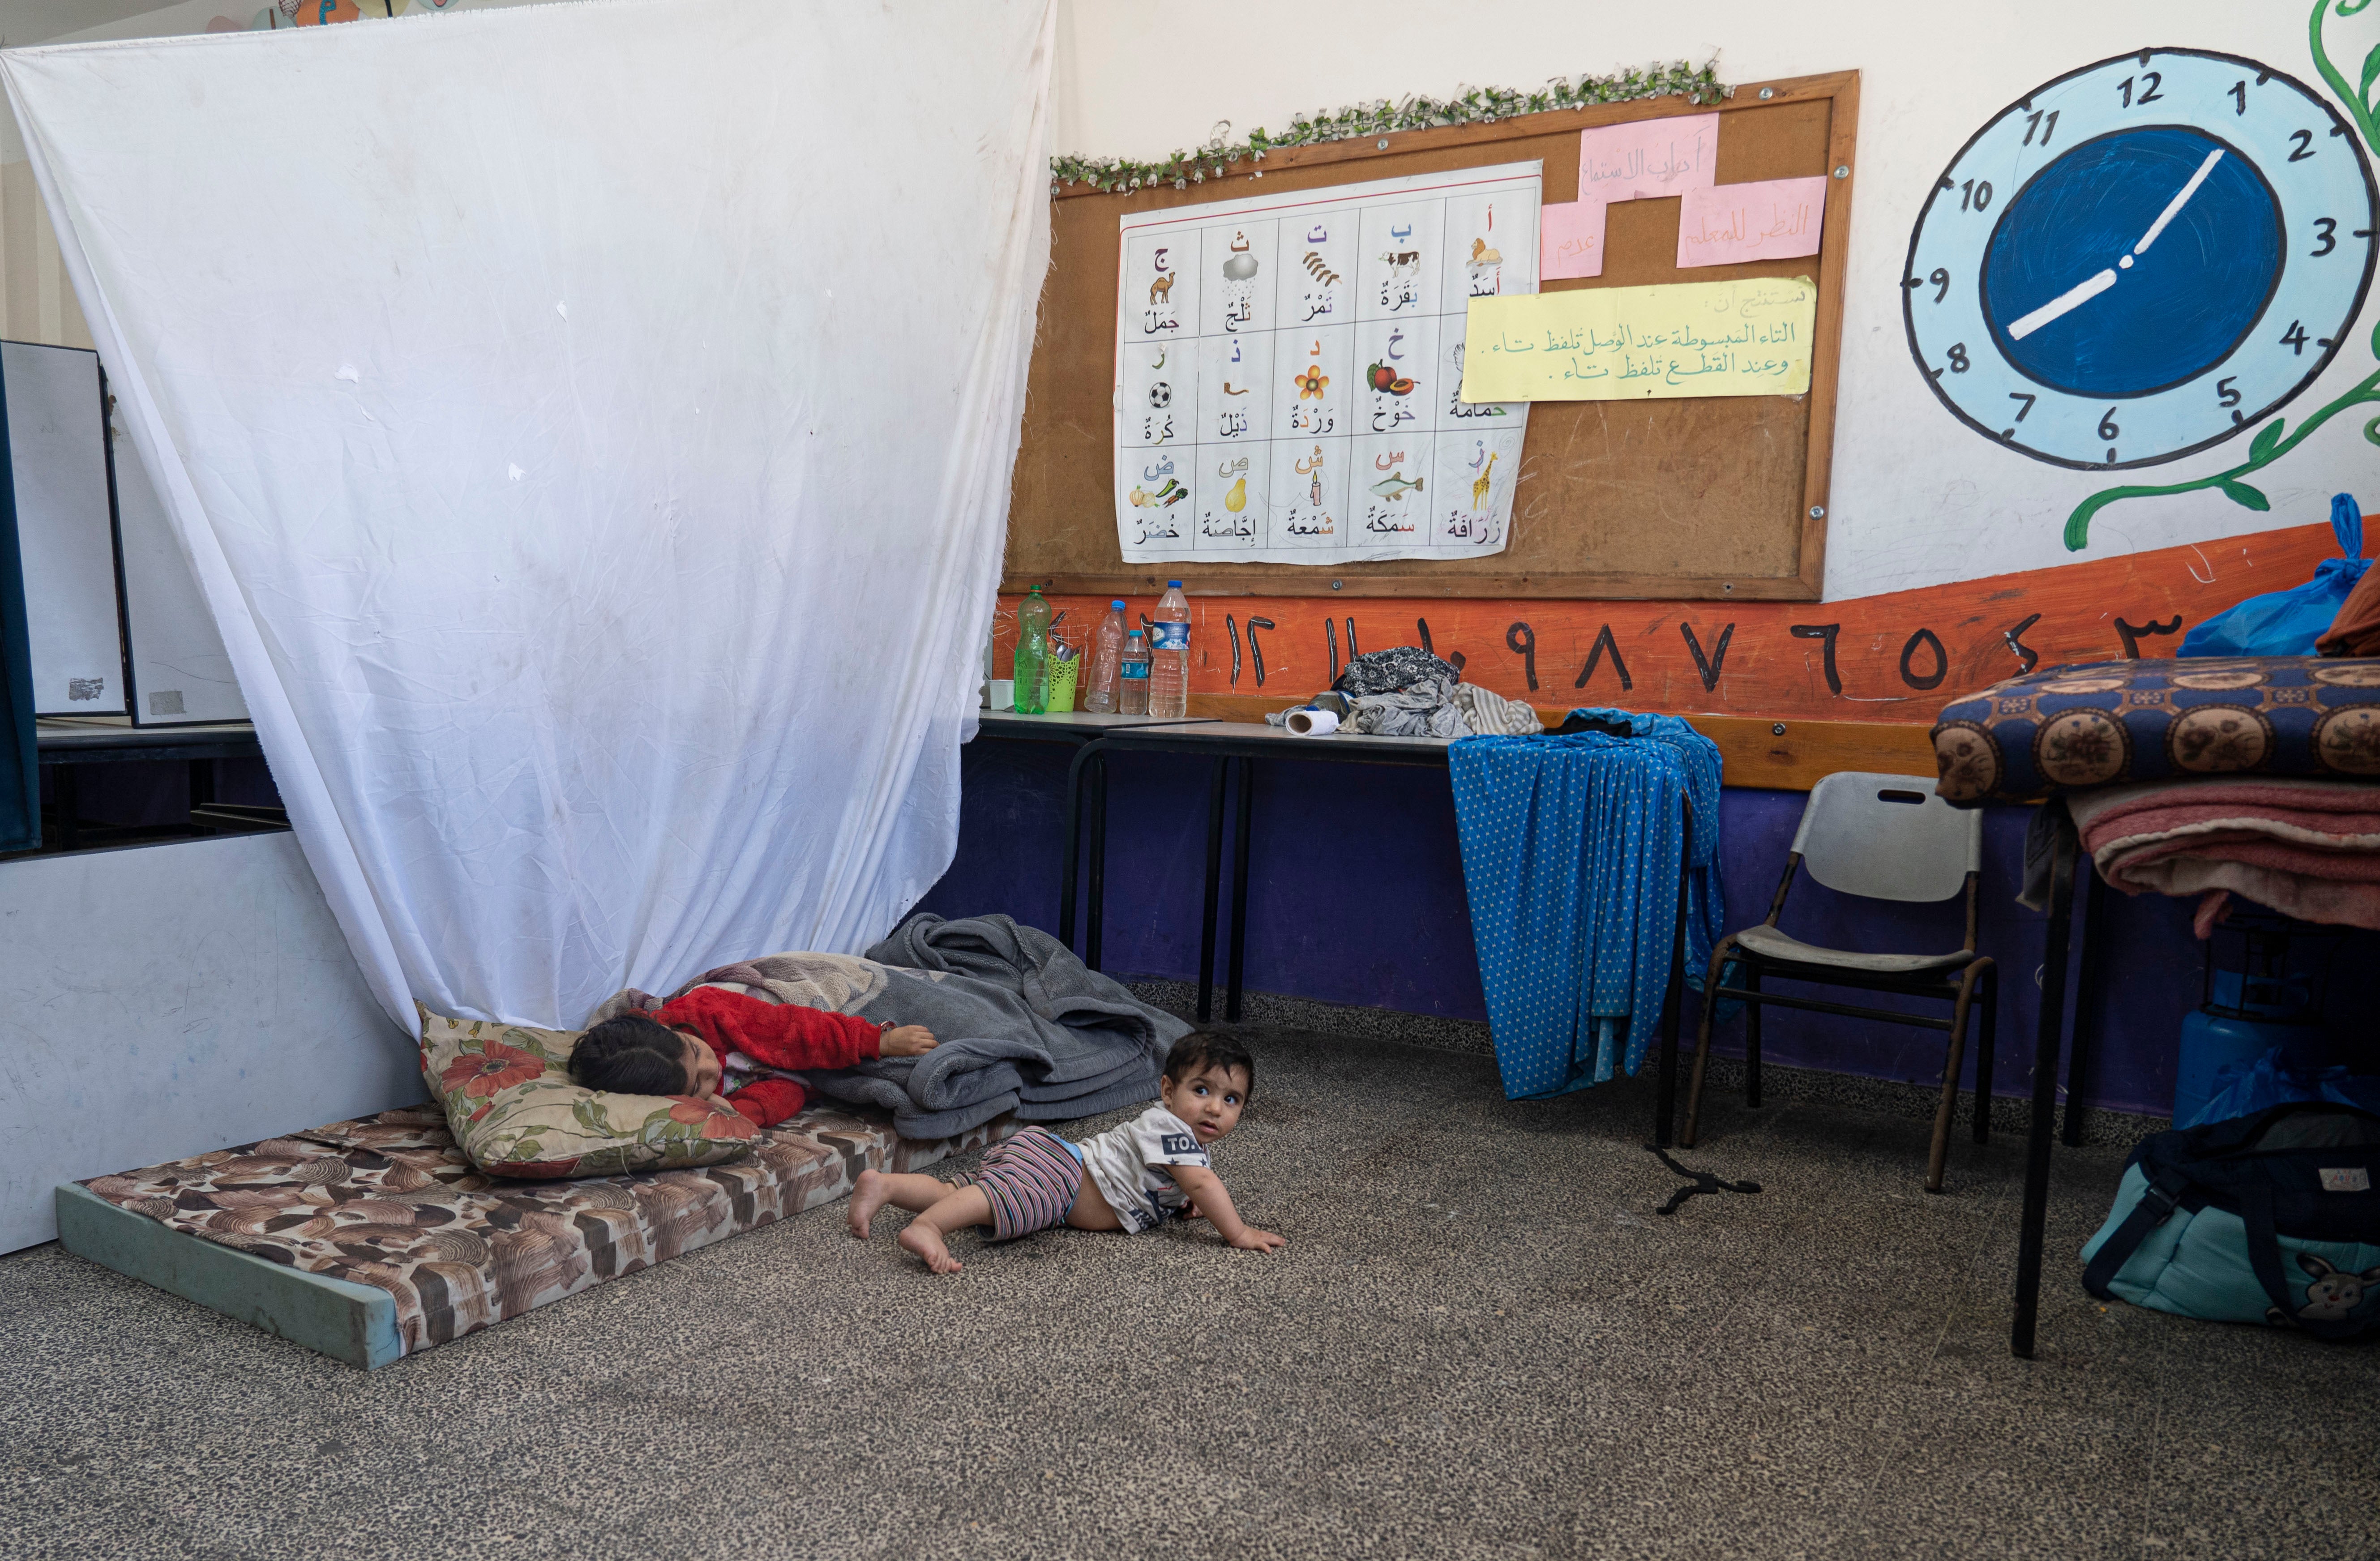 Children whose homes have been bombed rest in their makeshift bedroom in a UNRWA school